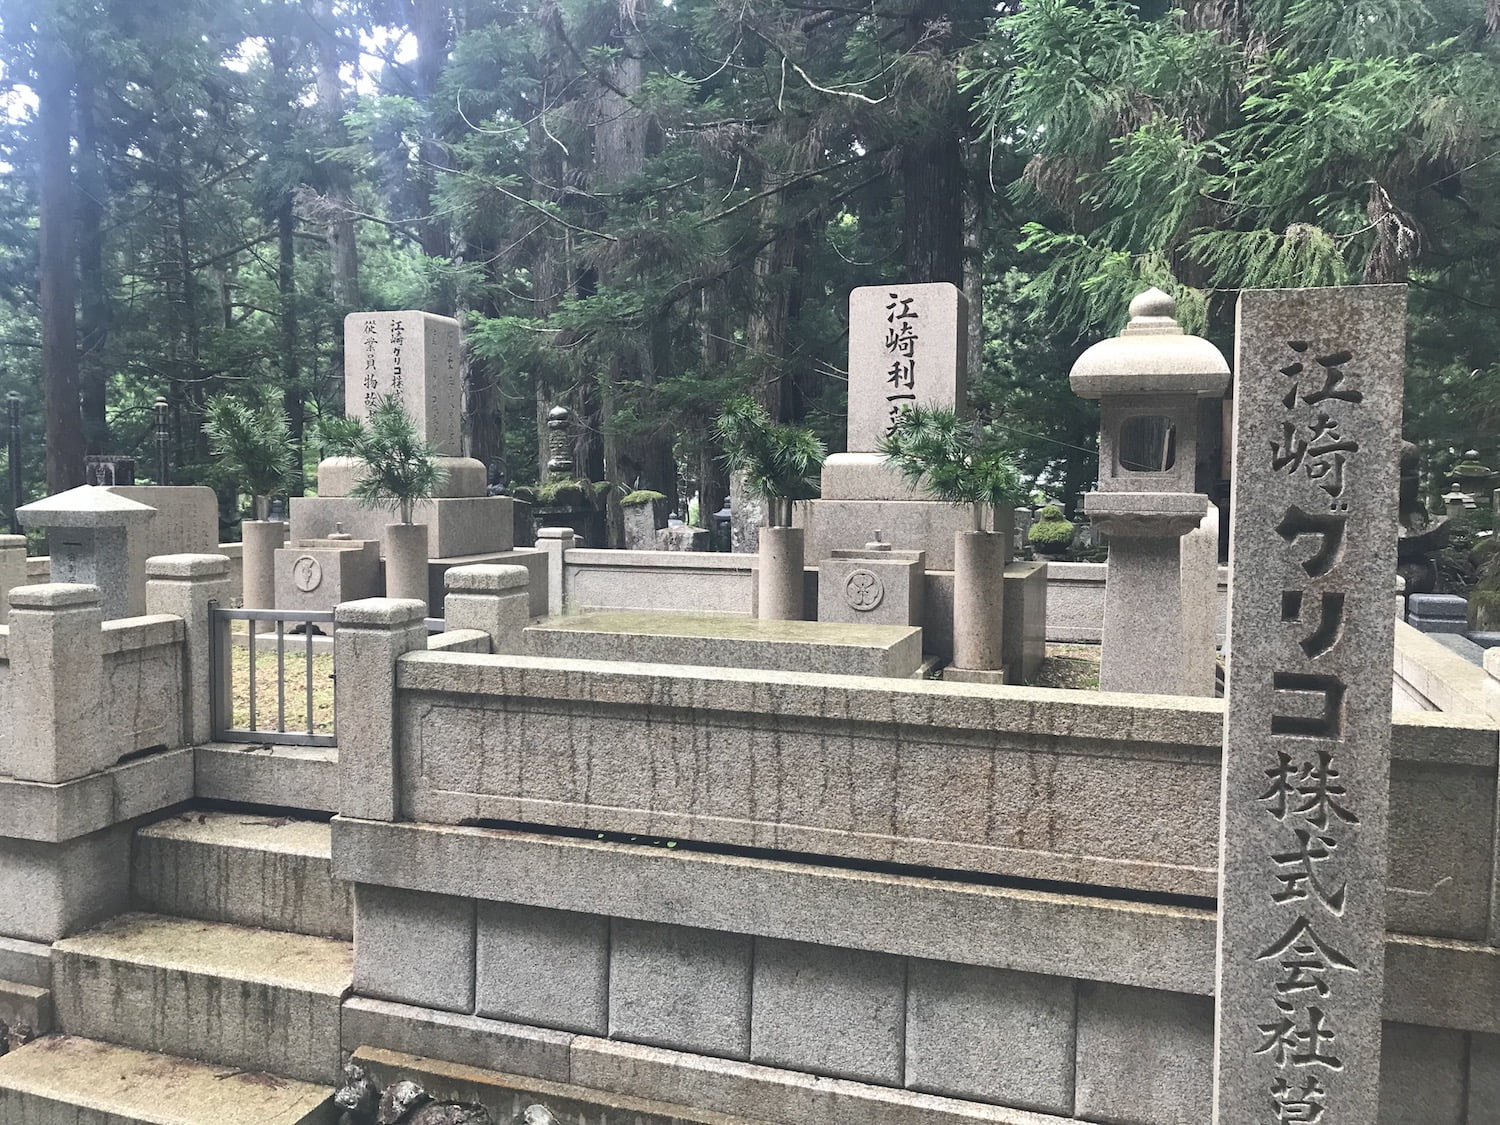 tomb of Ezaki, owner of famous confectionary company called Glico